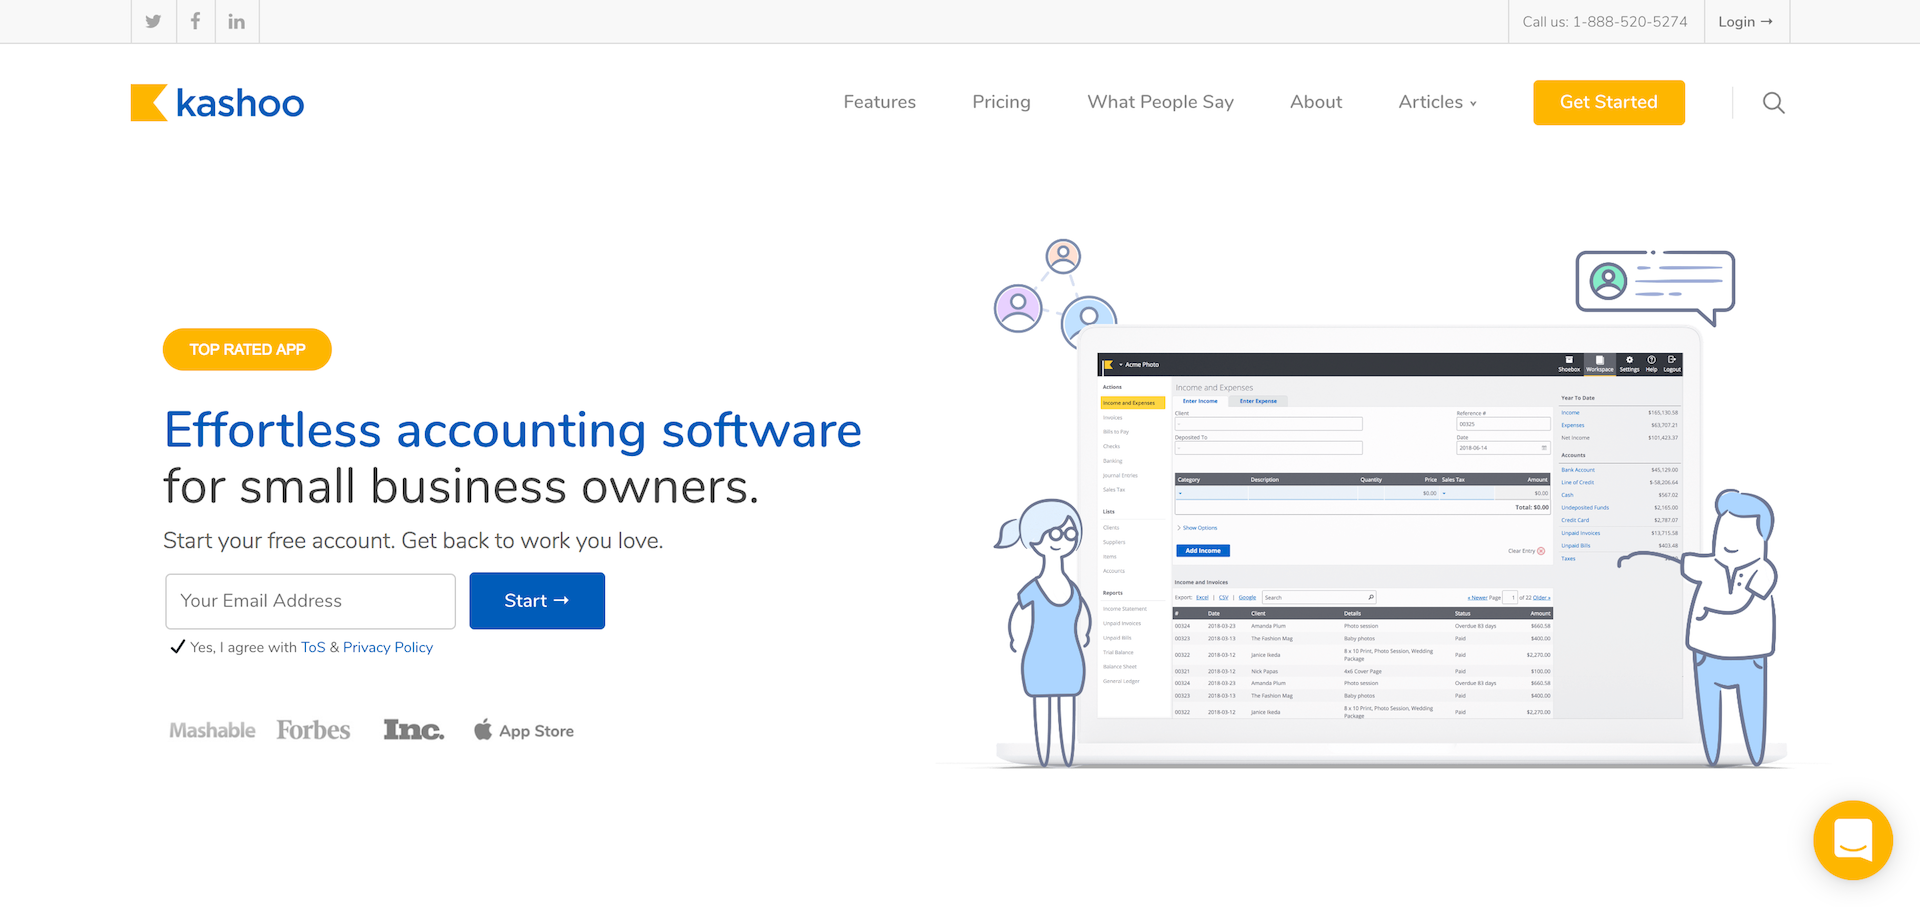 Online Accounting Software for Small Businesses